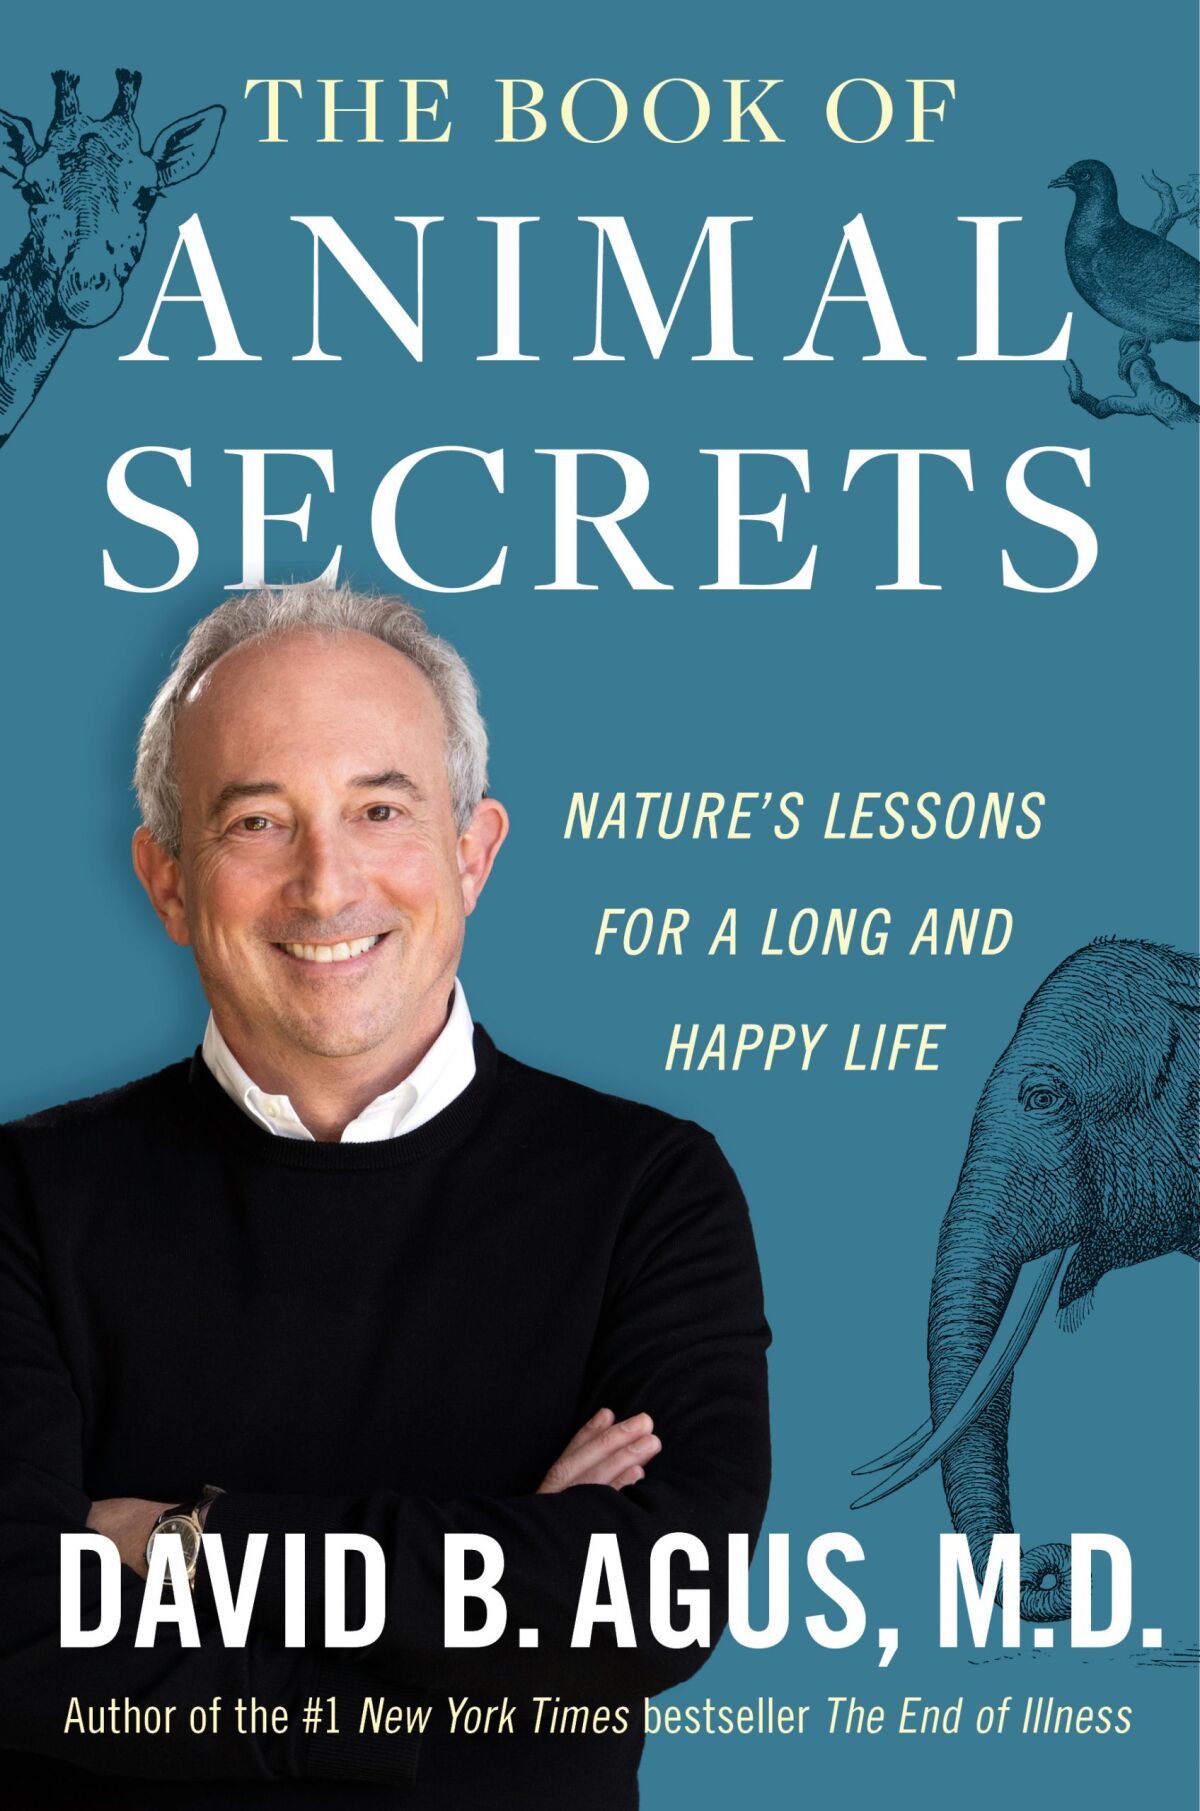 A smiling Dr. David Agus on the cover of "The Book of Animal Secrets: Nature's Lessons for a Long and Happy Life"